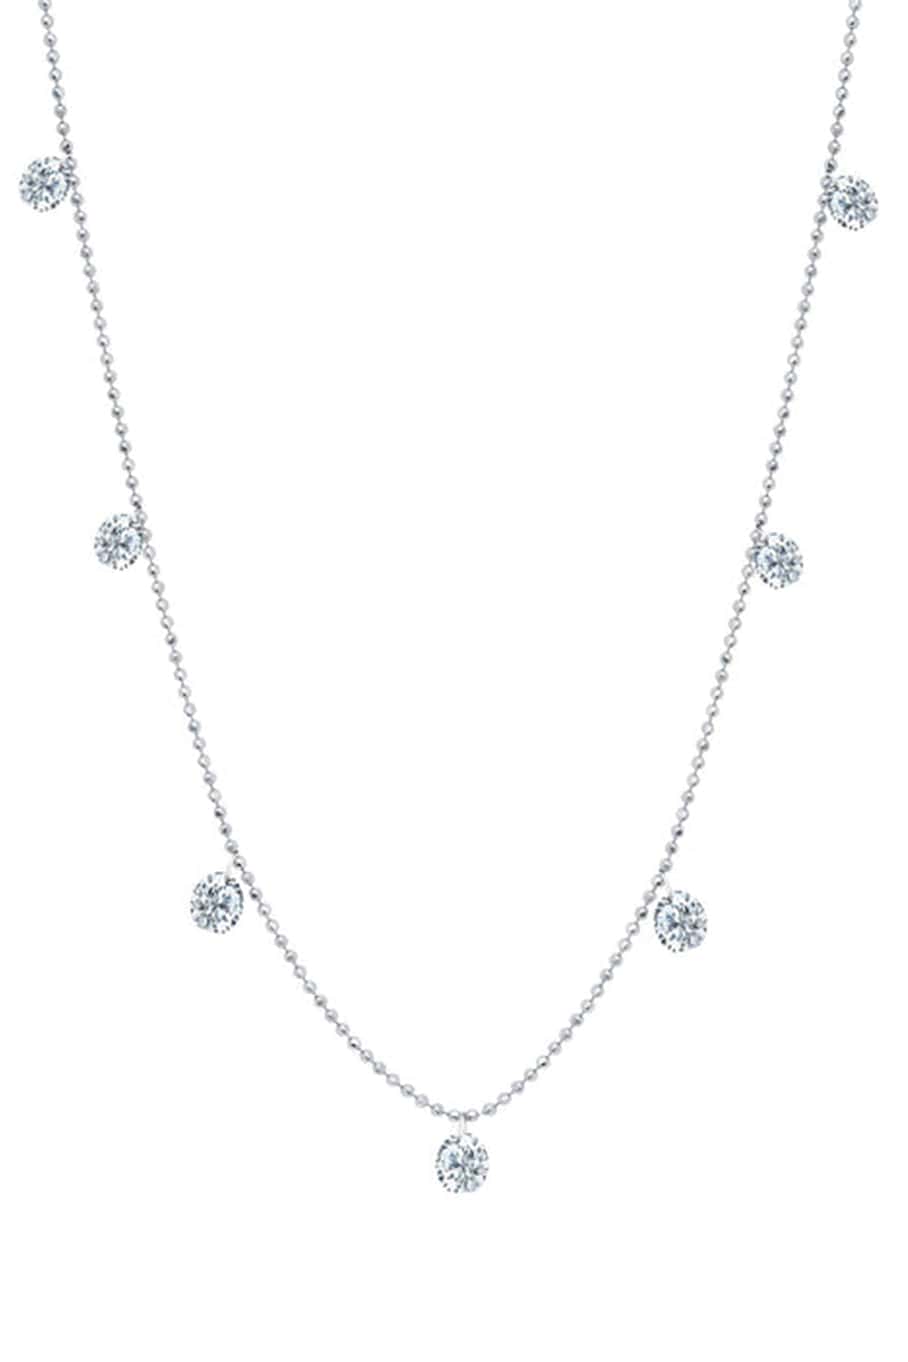 White Gold Small Floating Diamond Necklace – Marissa Collections